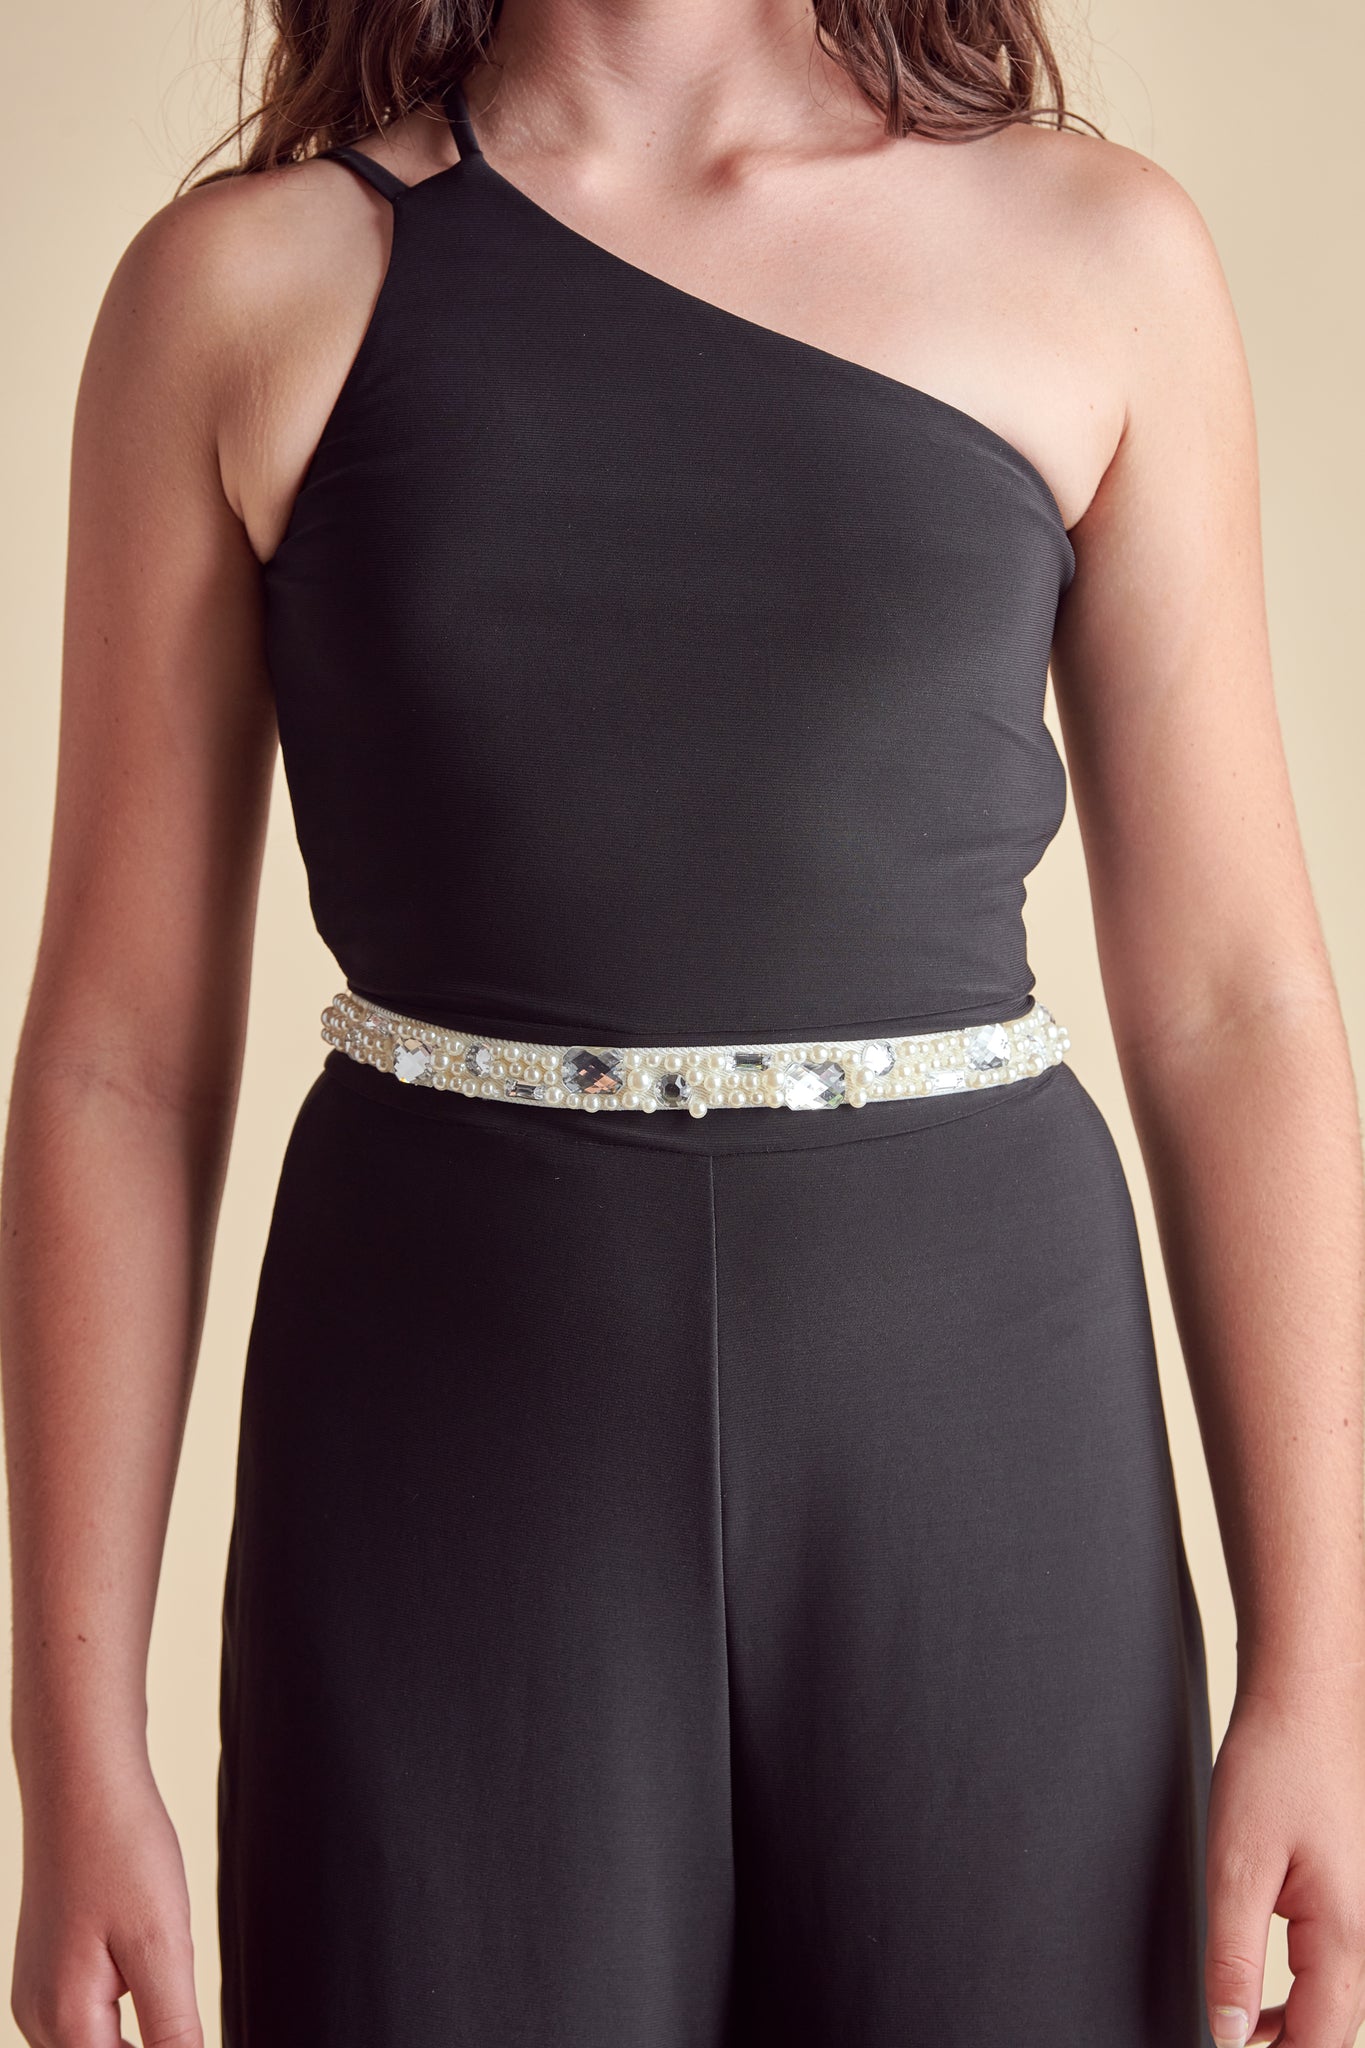 Girl in an ivory elasticated belt with pearl and gems.